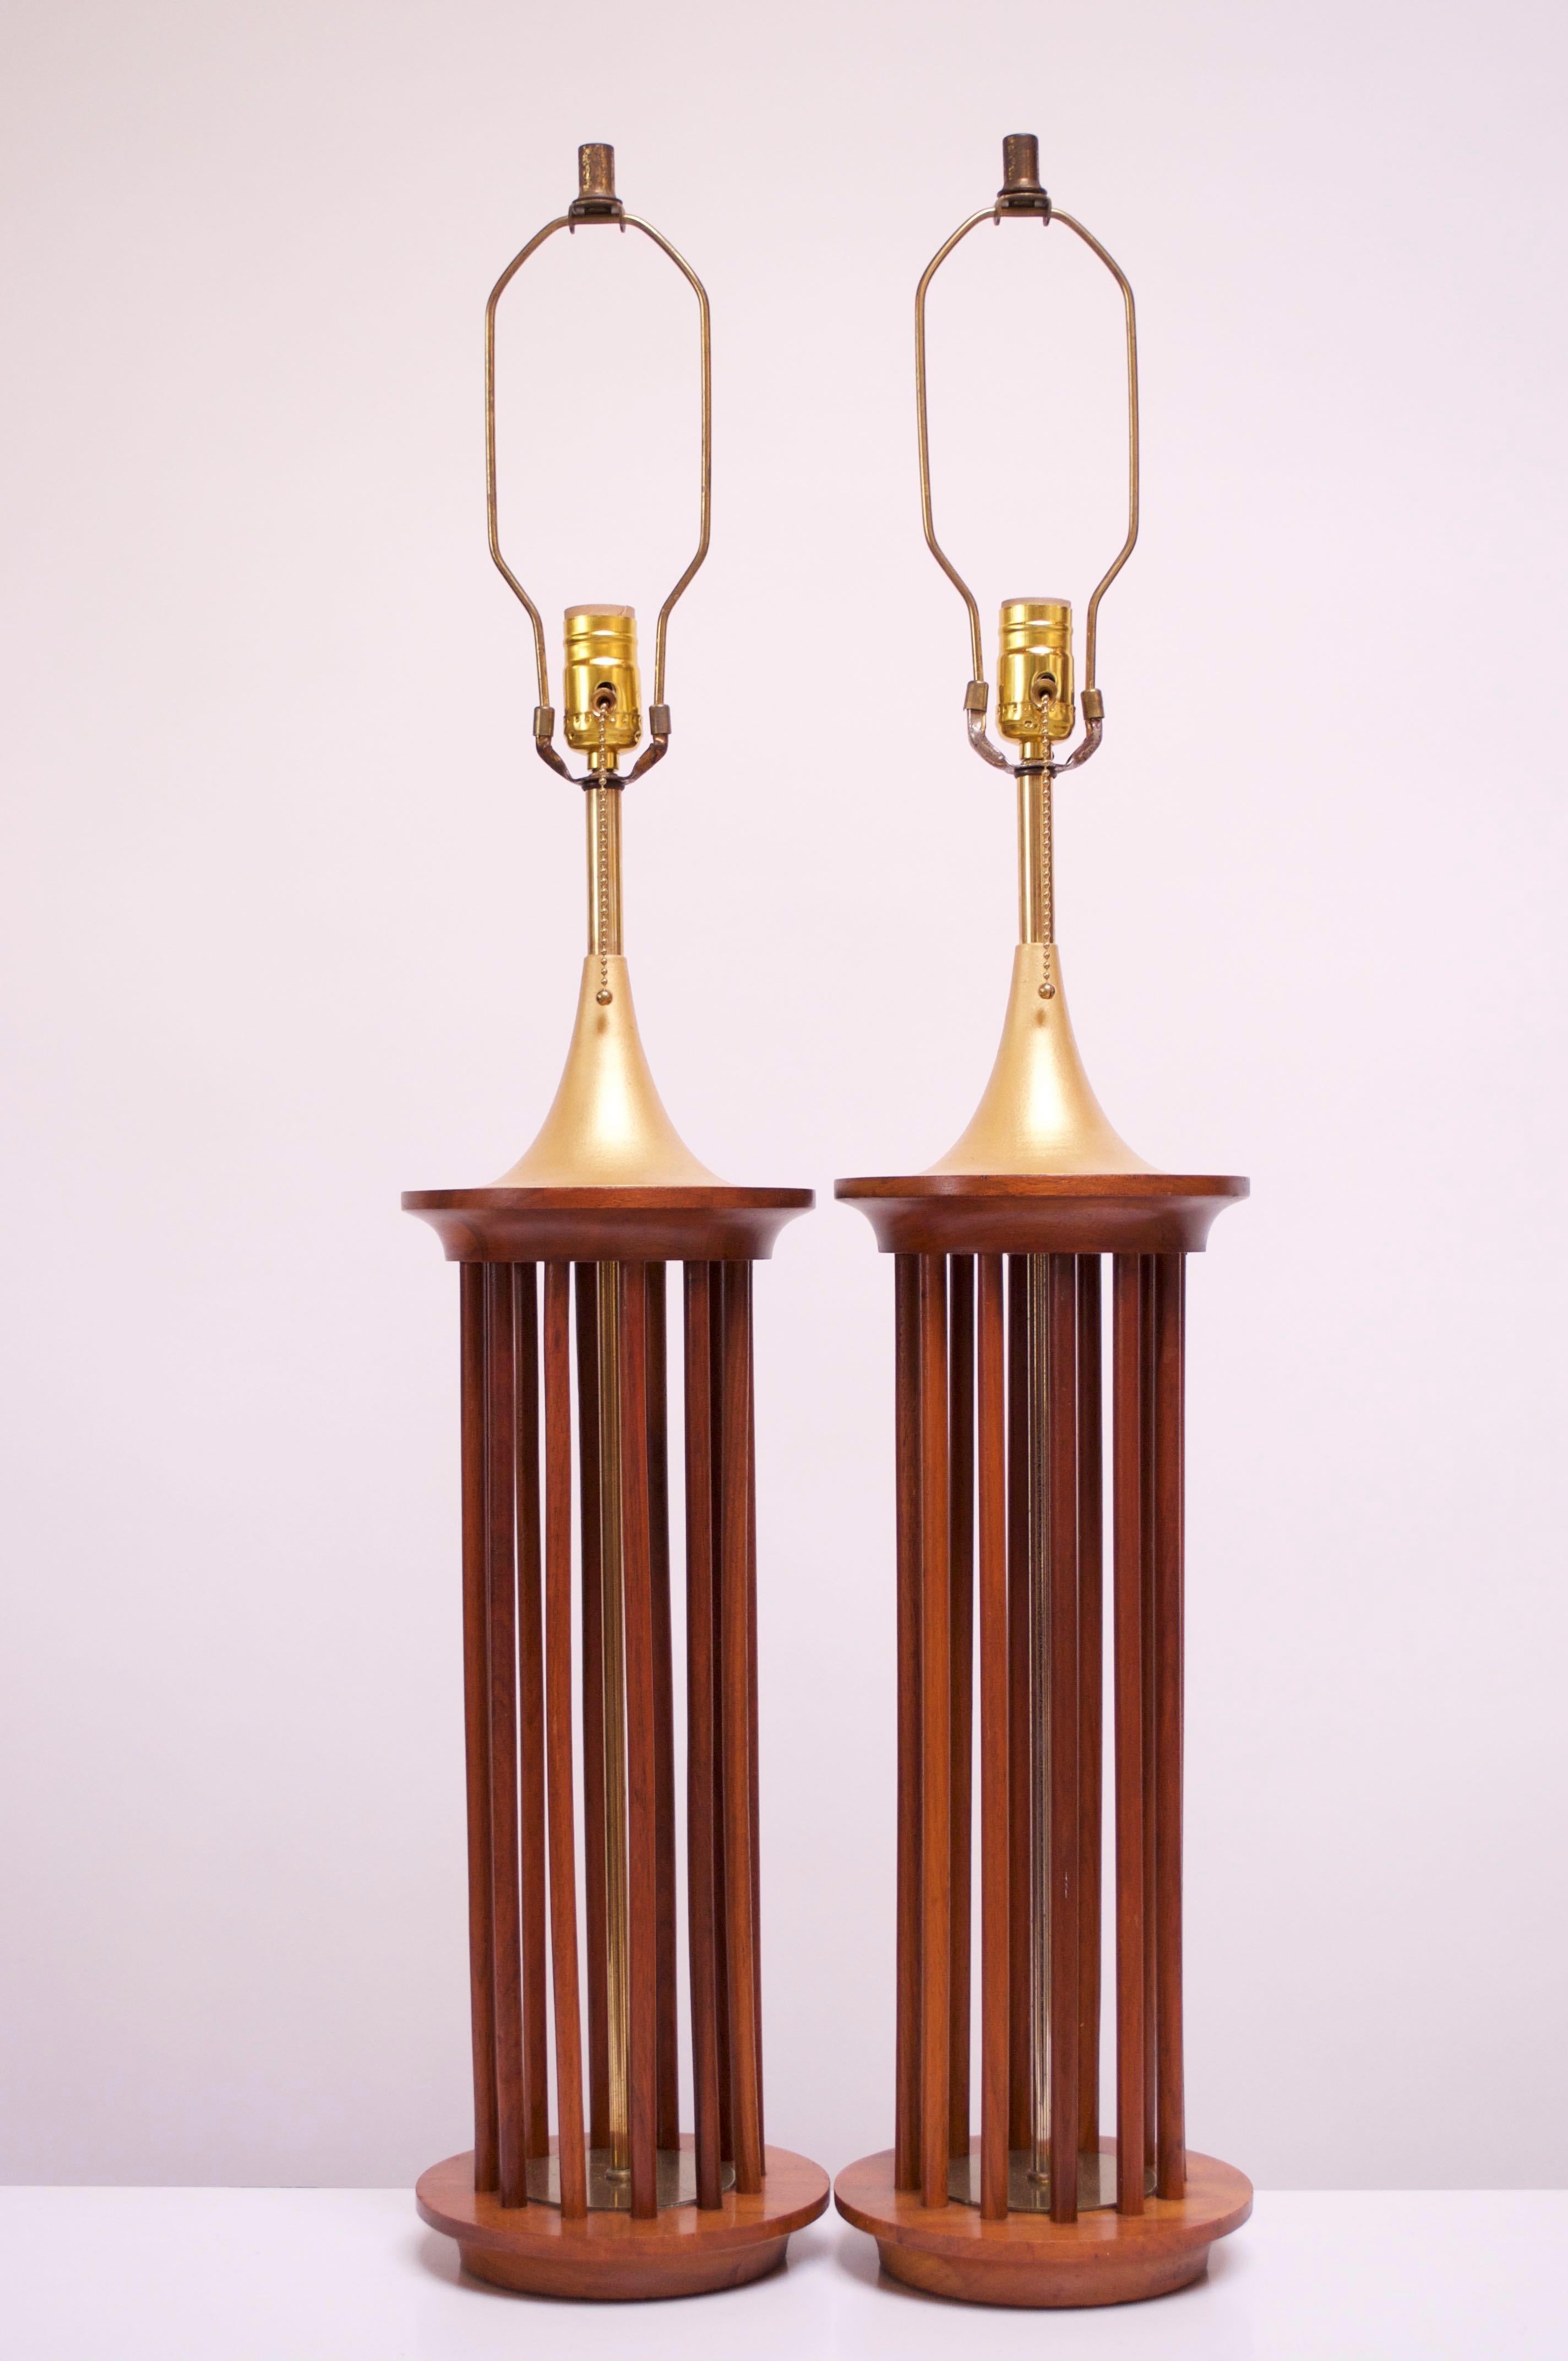 Elegant pair of 1950s American Modern table lamps composed of a solid walnut platform base and spindle-constructed frame that houses an inset brass circular base and brass-plated rod at the center. Lamps are finished on the top by gilt aluminum